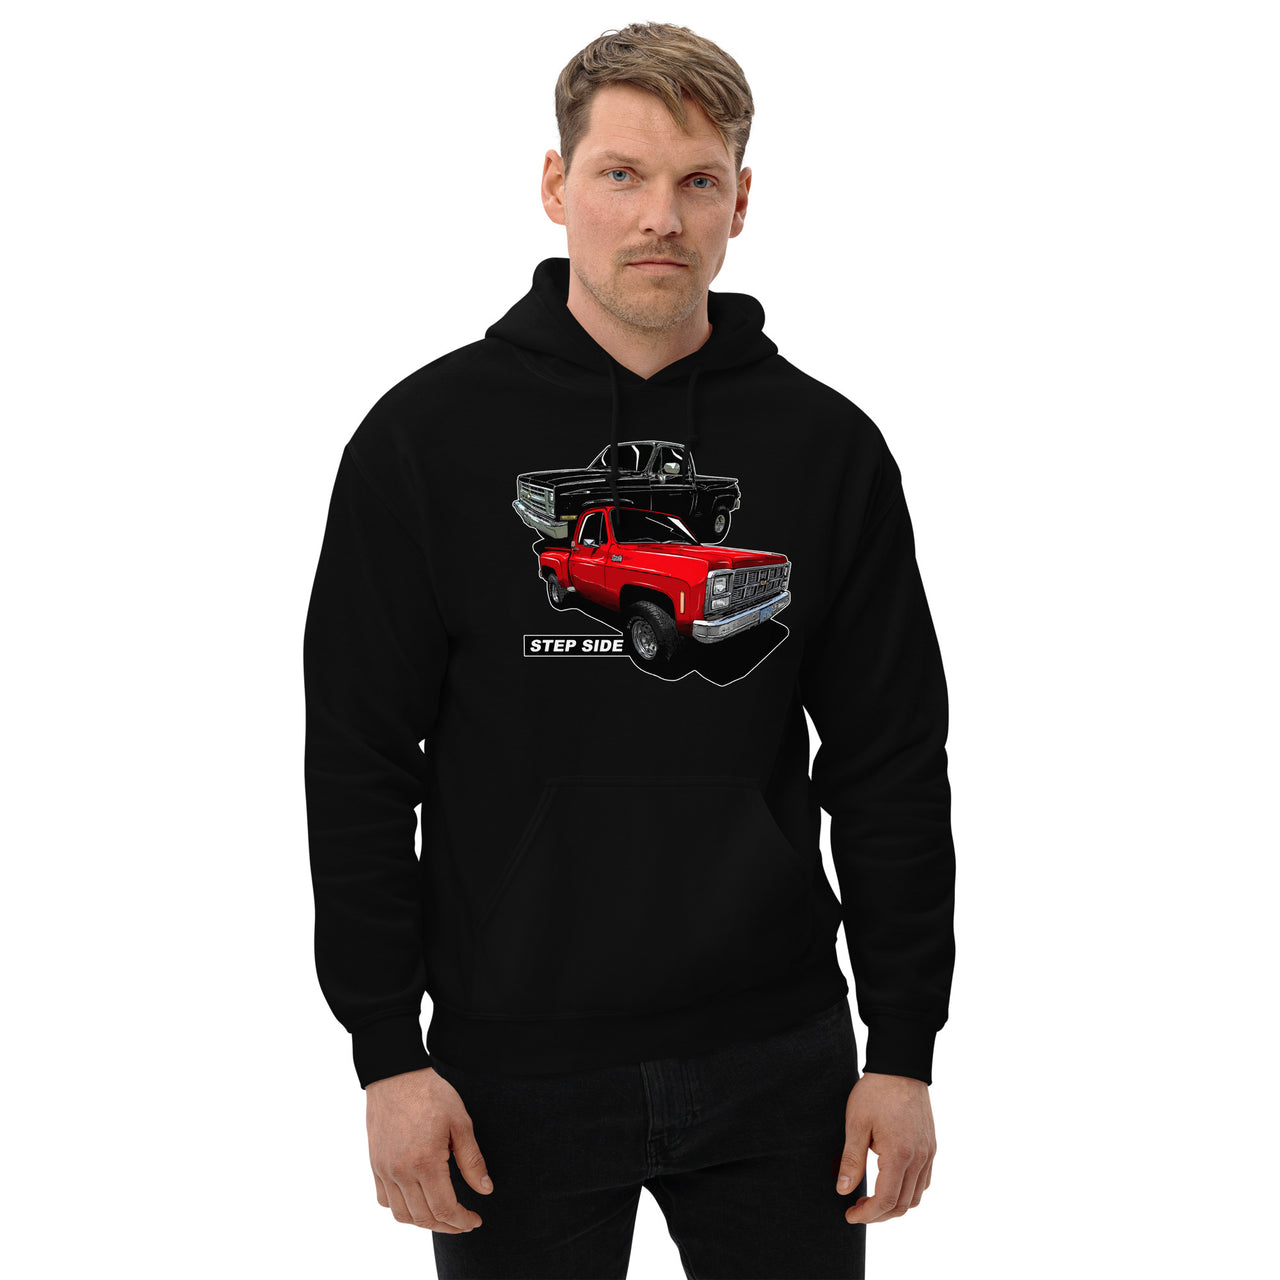 step side square body truck hoodie modeled in black